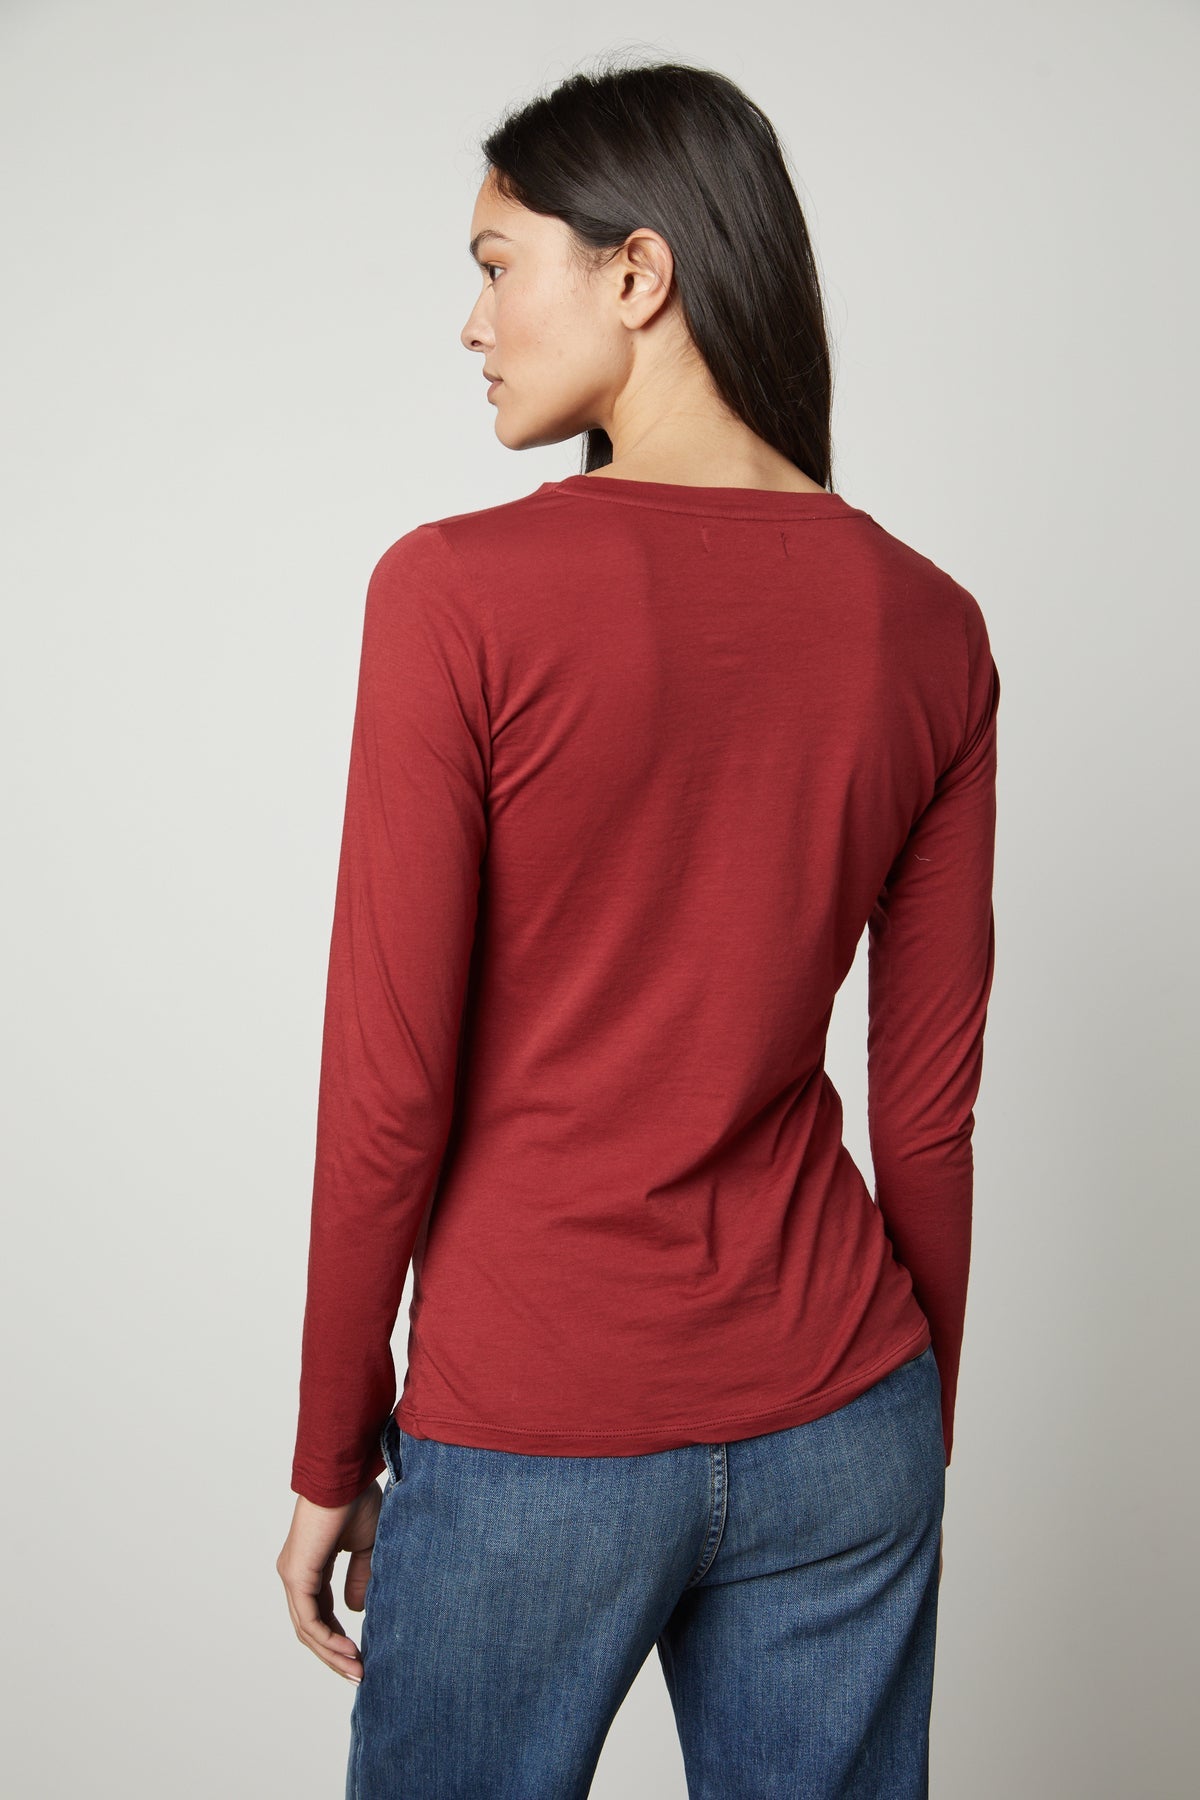 The back view of a woman wearing a red Velvet by Graham & Spencer ZOFINA GAUZY WHISPER FITTED CREW NECK TEE.-35783263224001